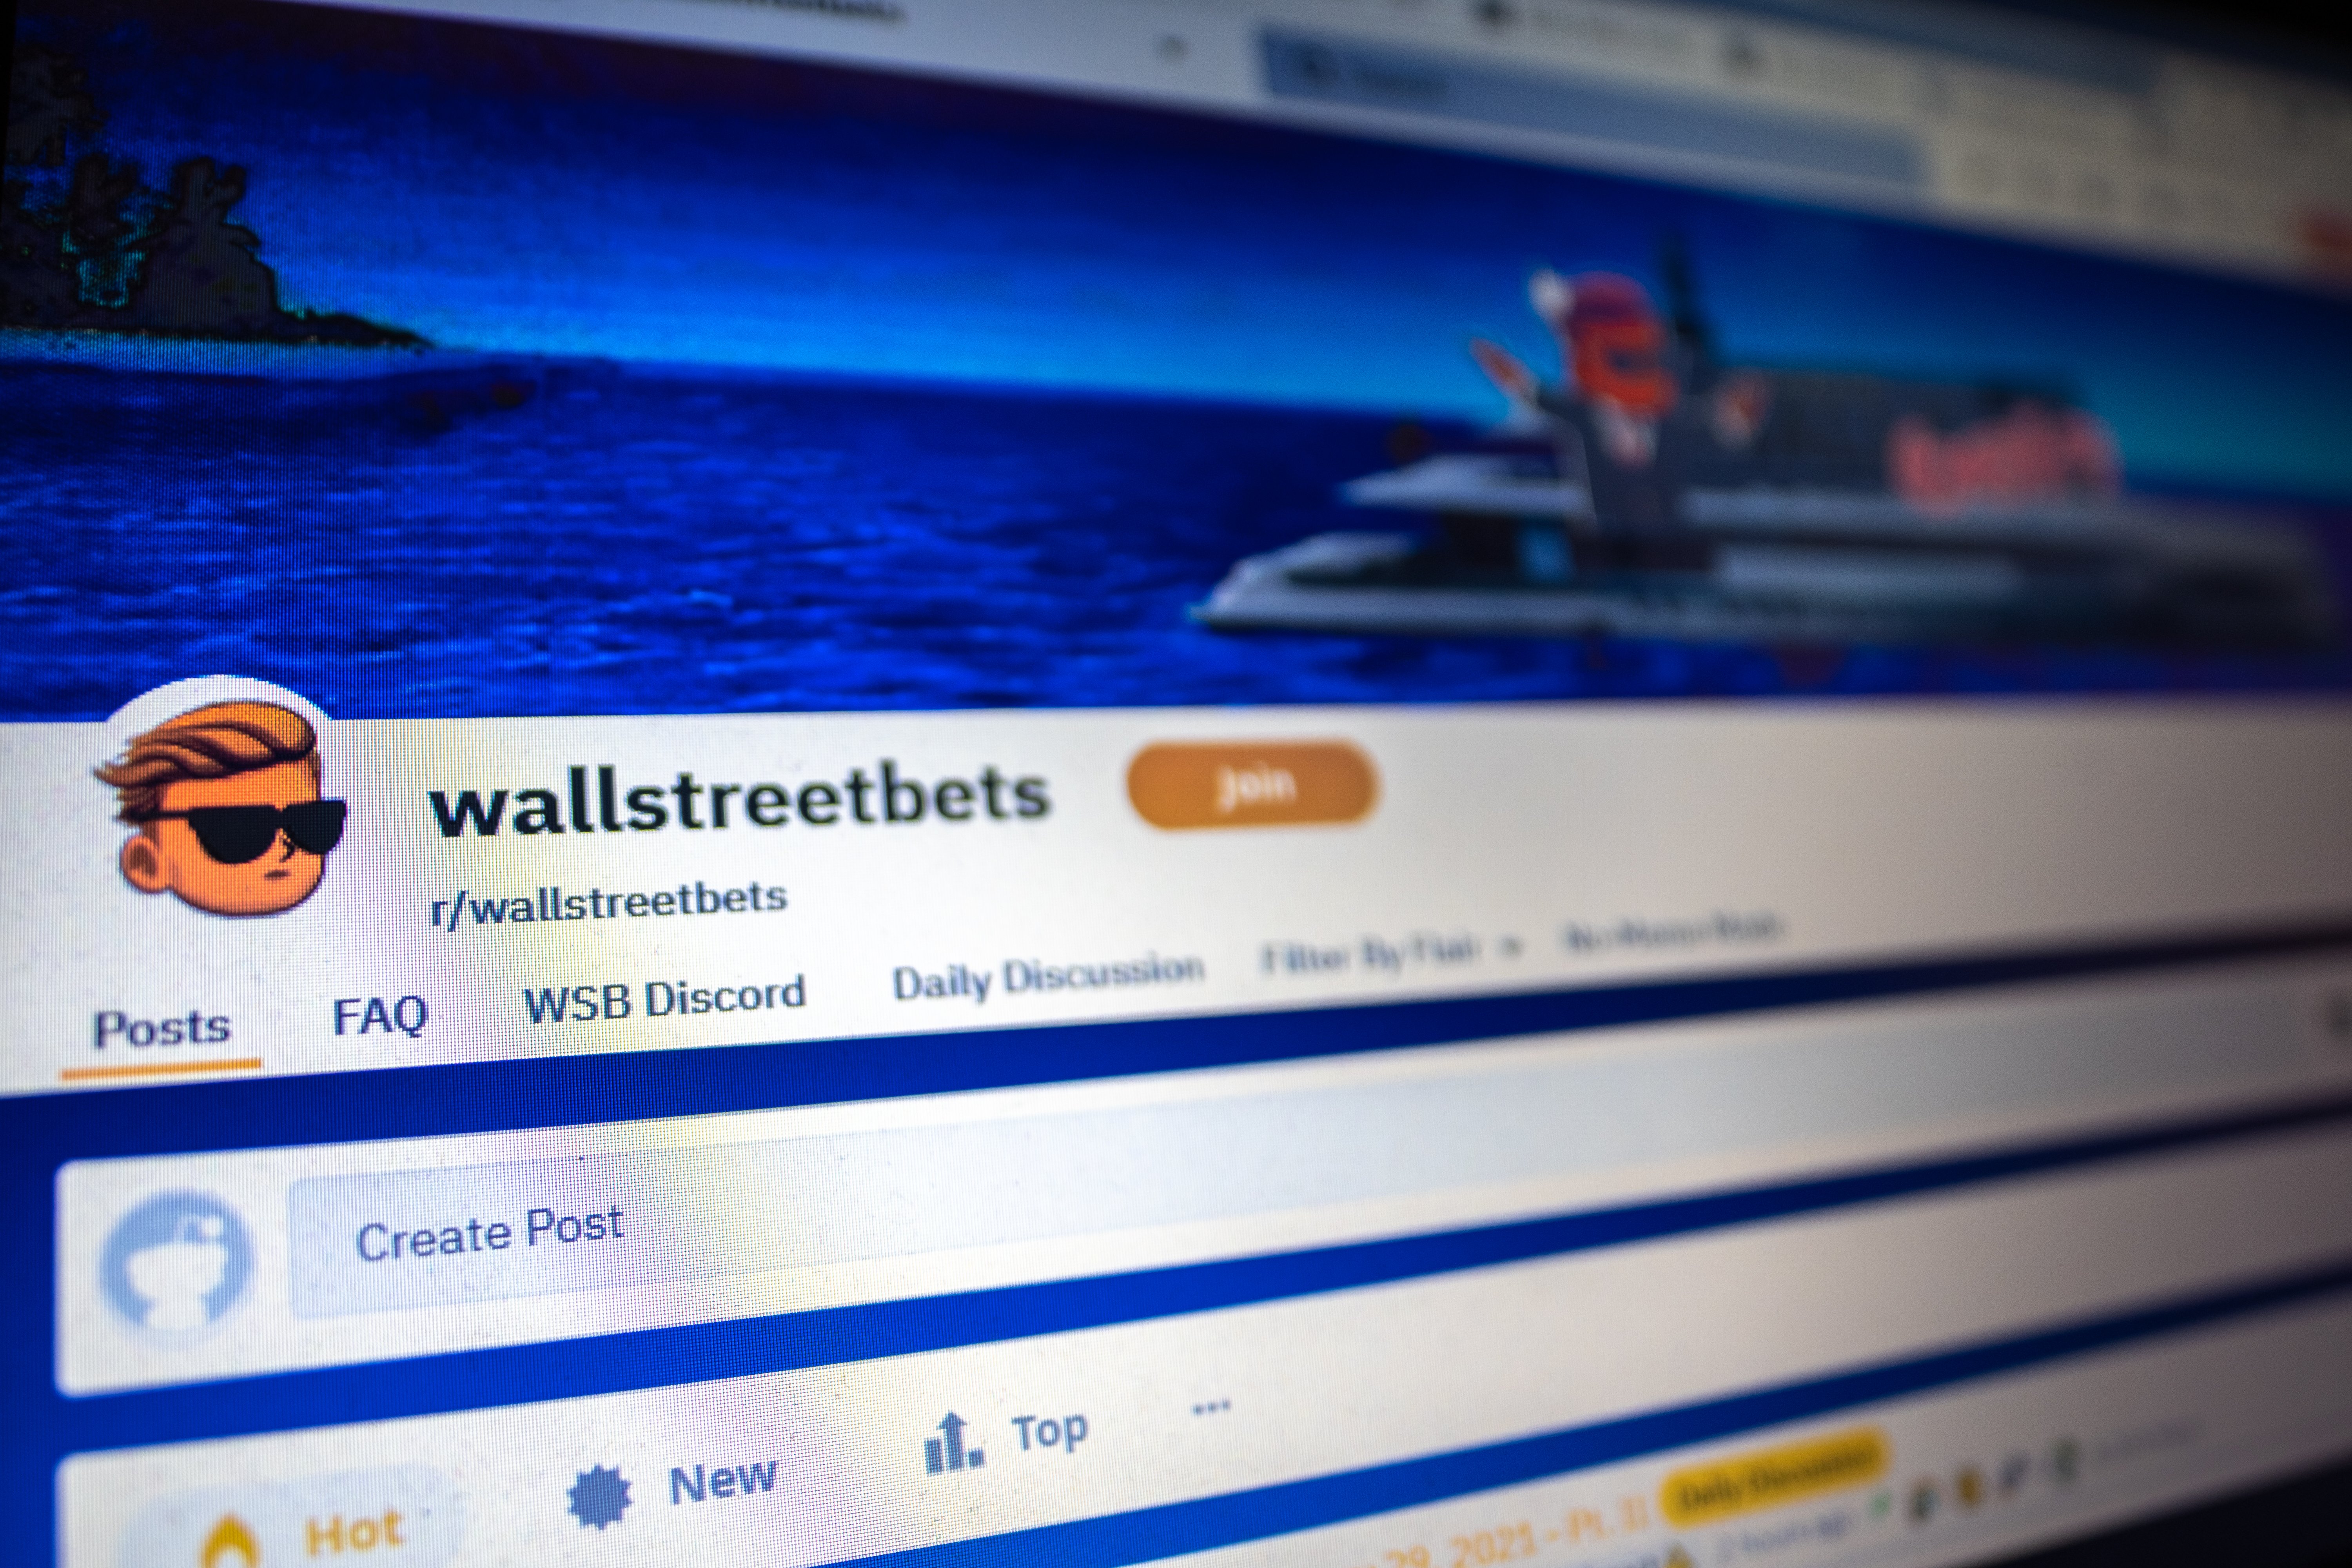 What Is WallStreetBets and What Stocks Are They Targeting?